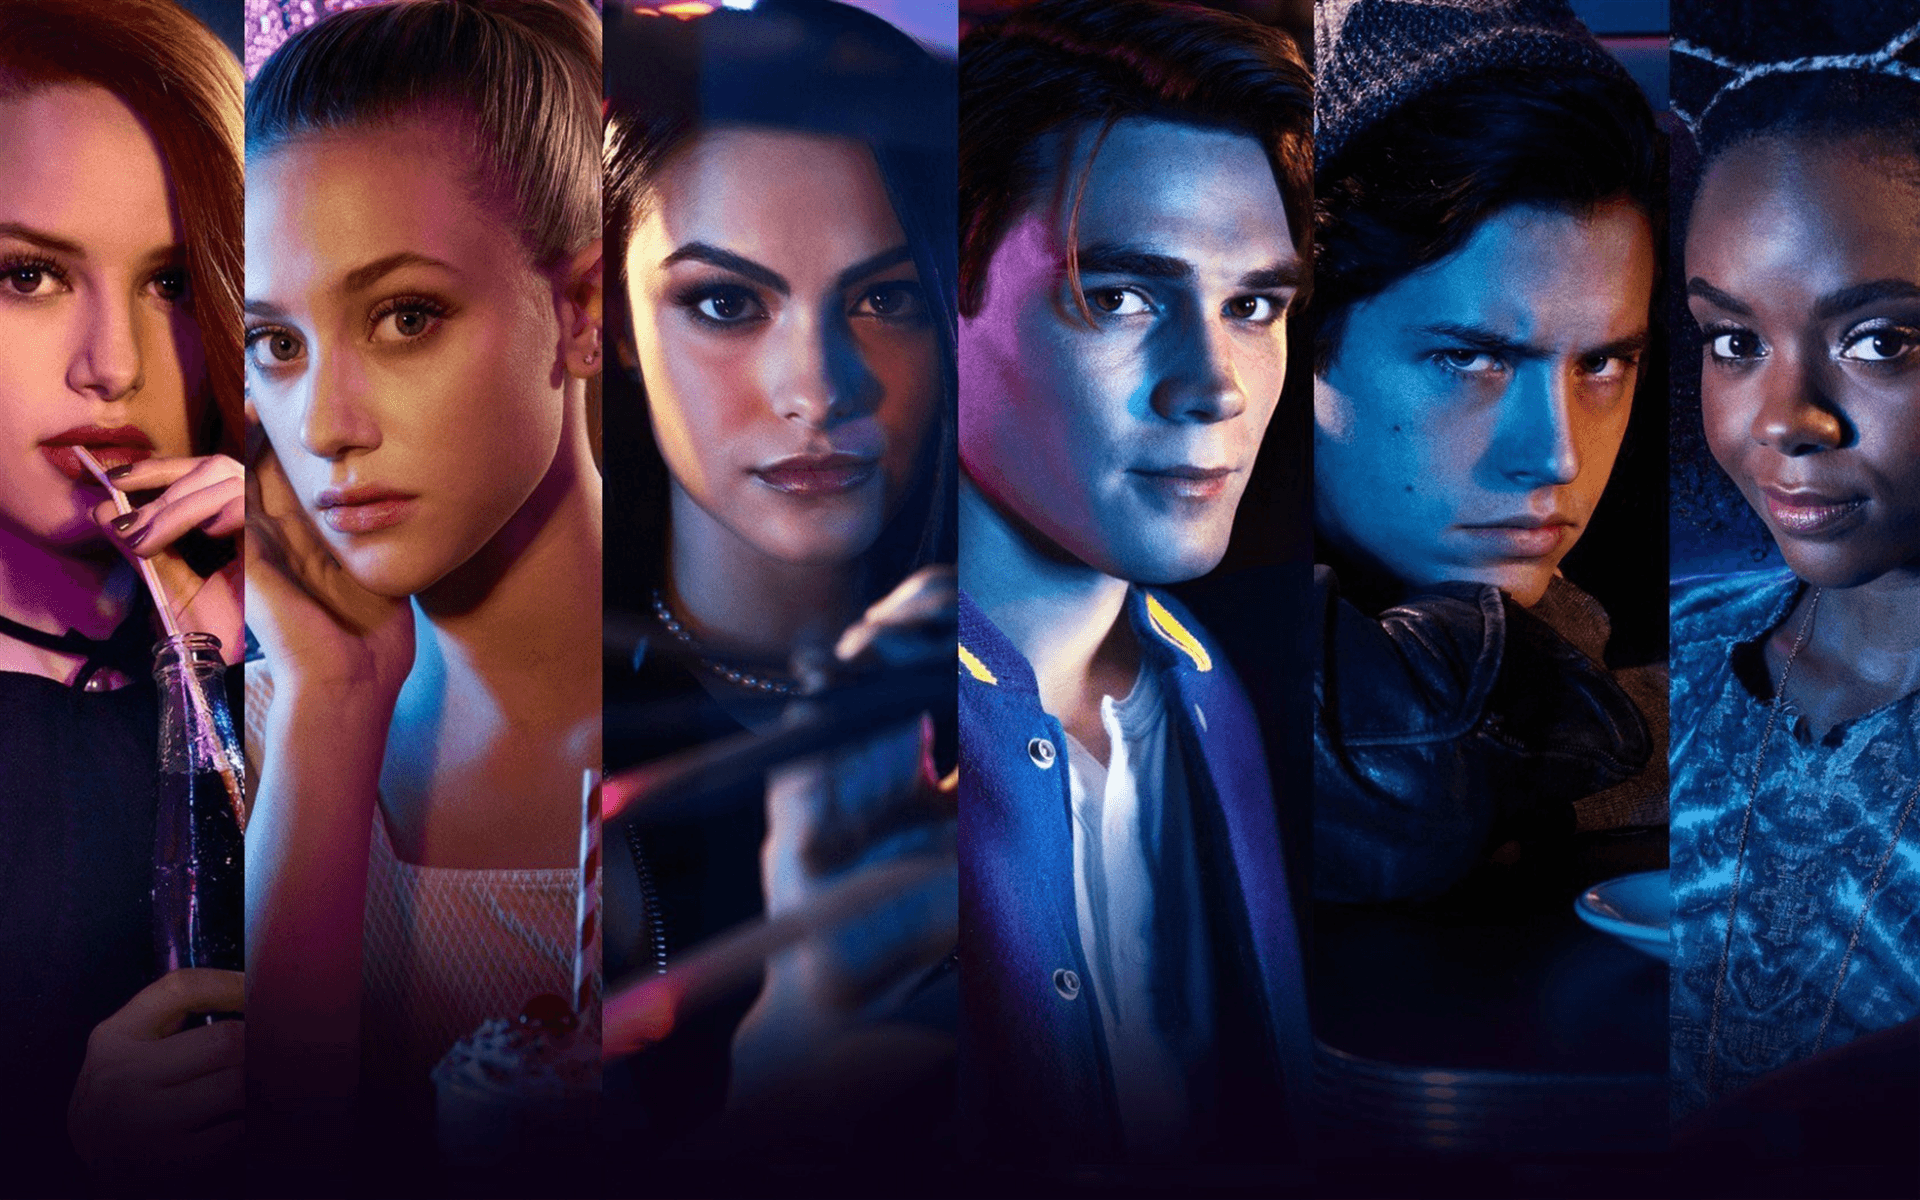 Download wallpaper Riverdale, Camila Mendes, Betty Cooper